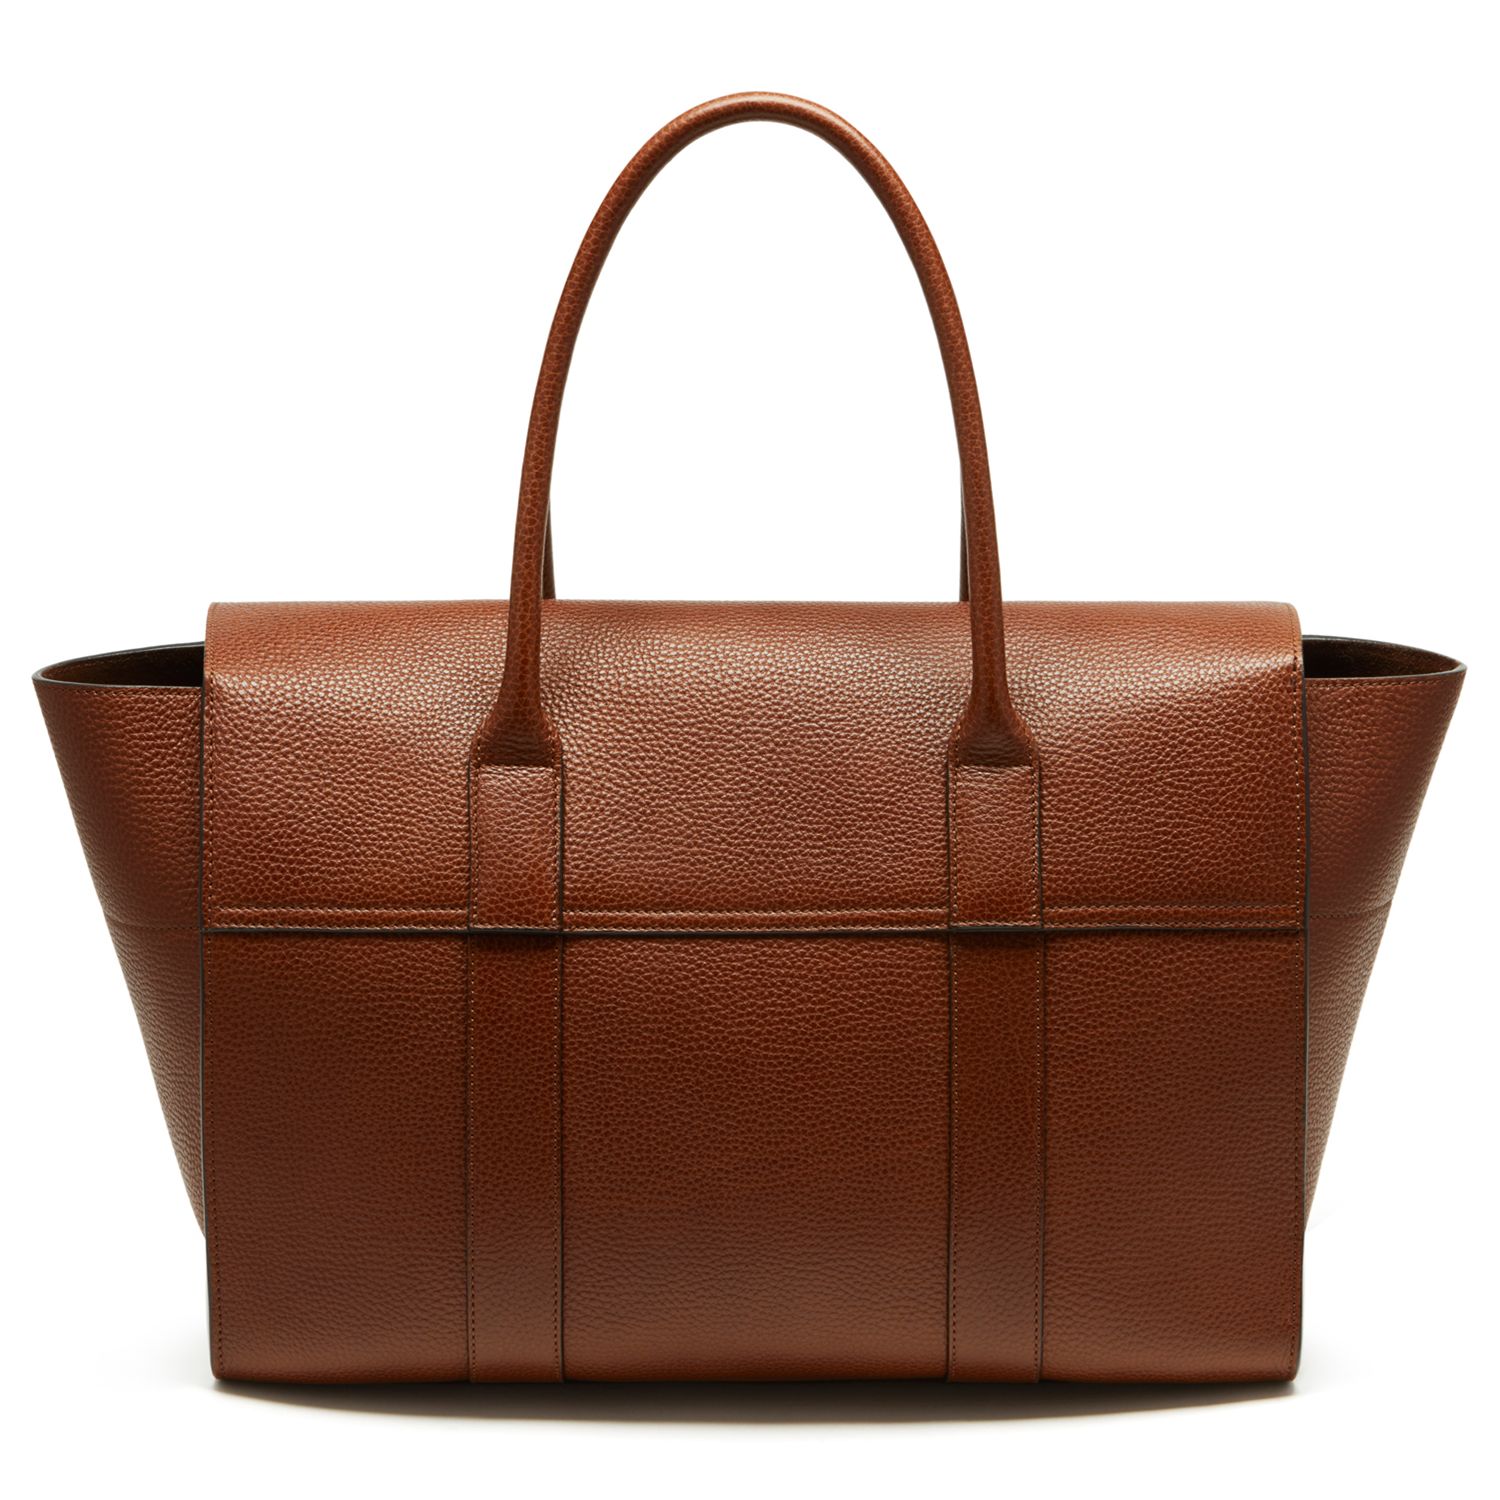 Mulberry Bayswater New Classic Natural Grain Leather Bag